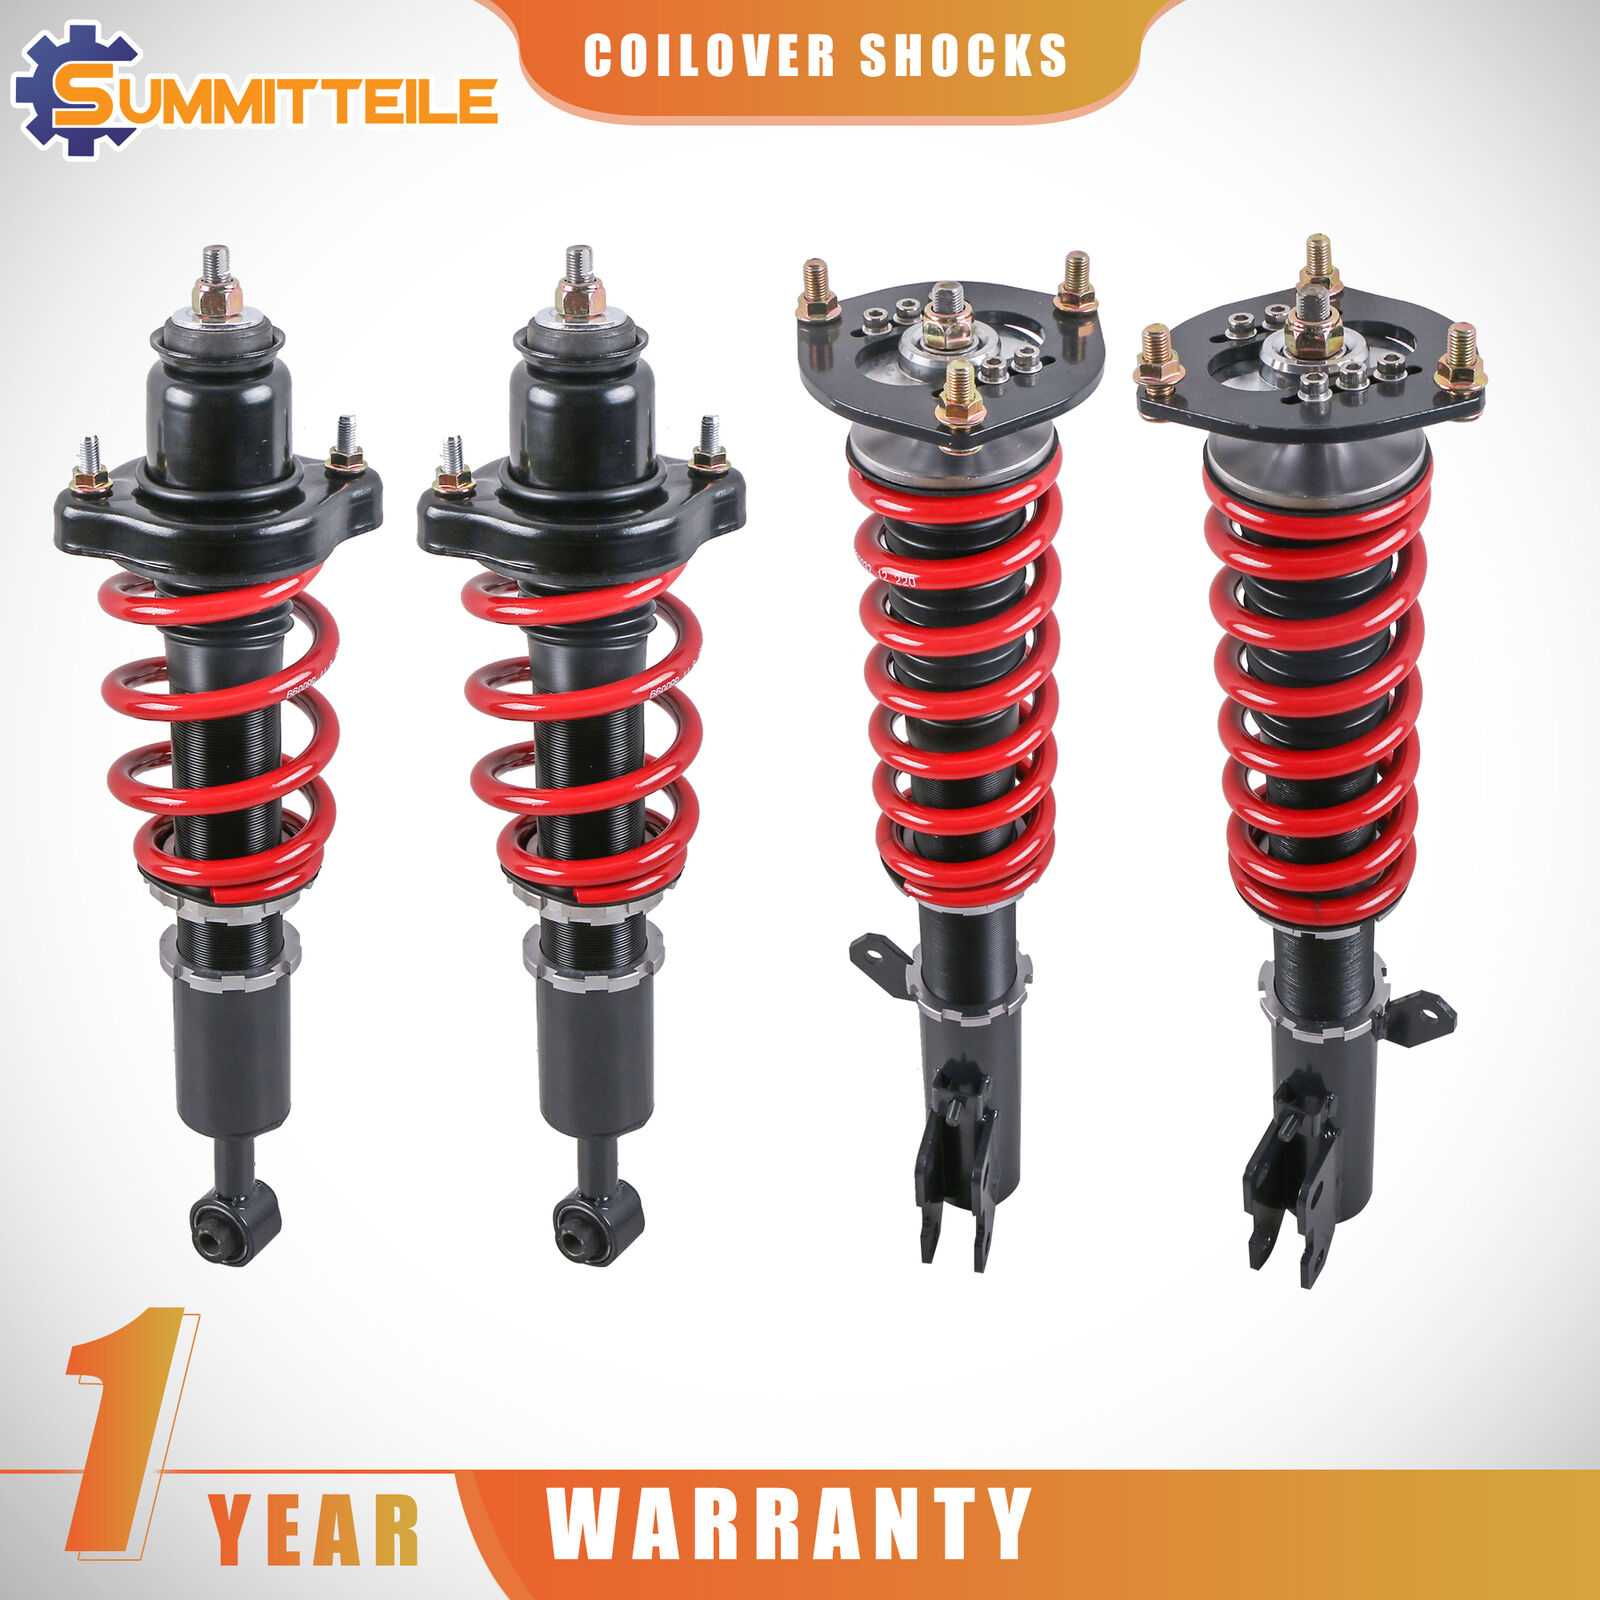 4X Complete Coilovers Shock Struts For 2008-2016 Mitsubishi Lancer & Ralliart